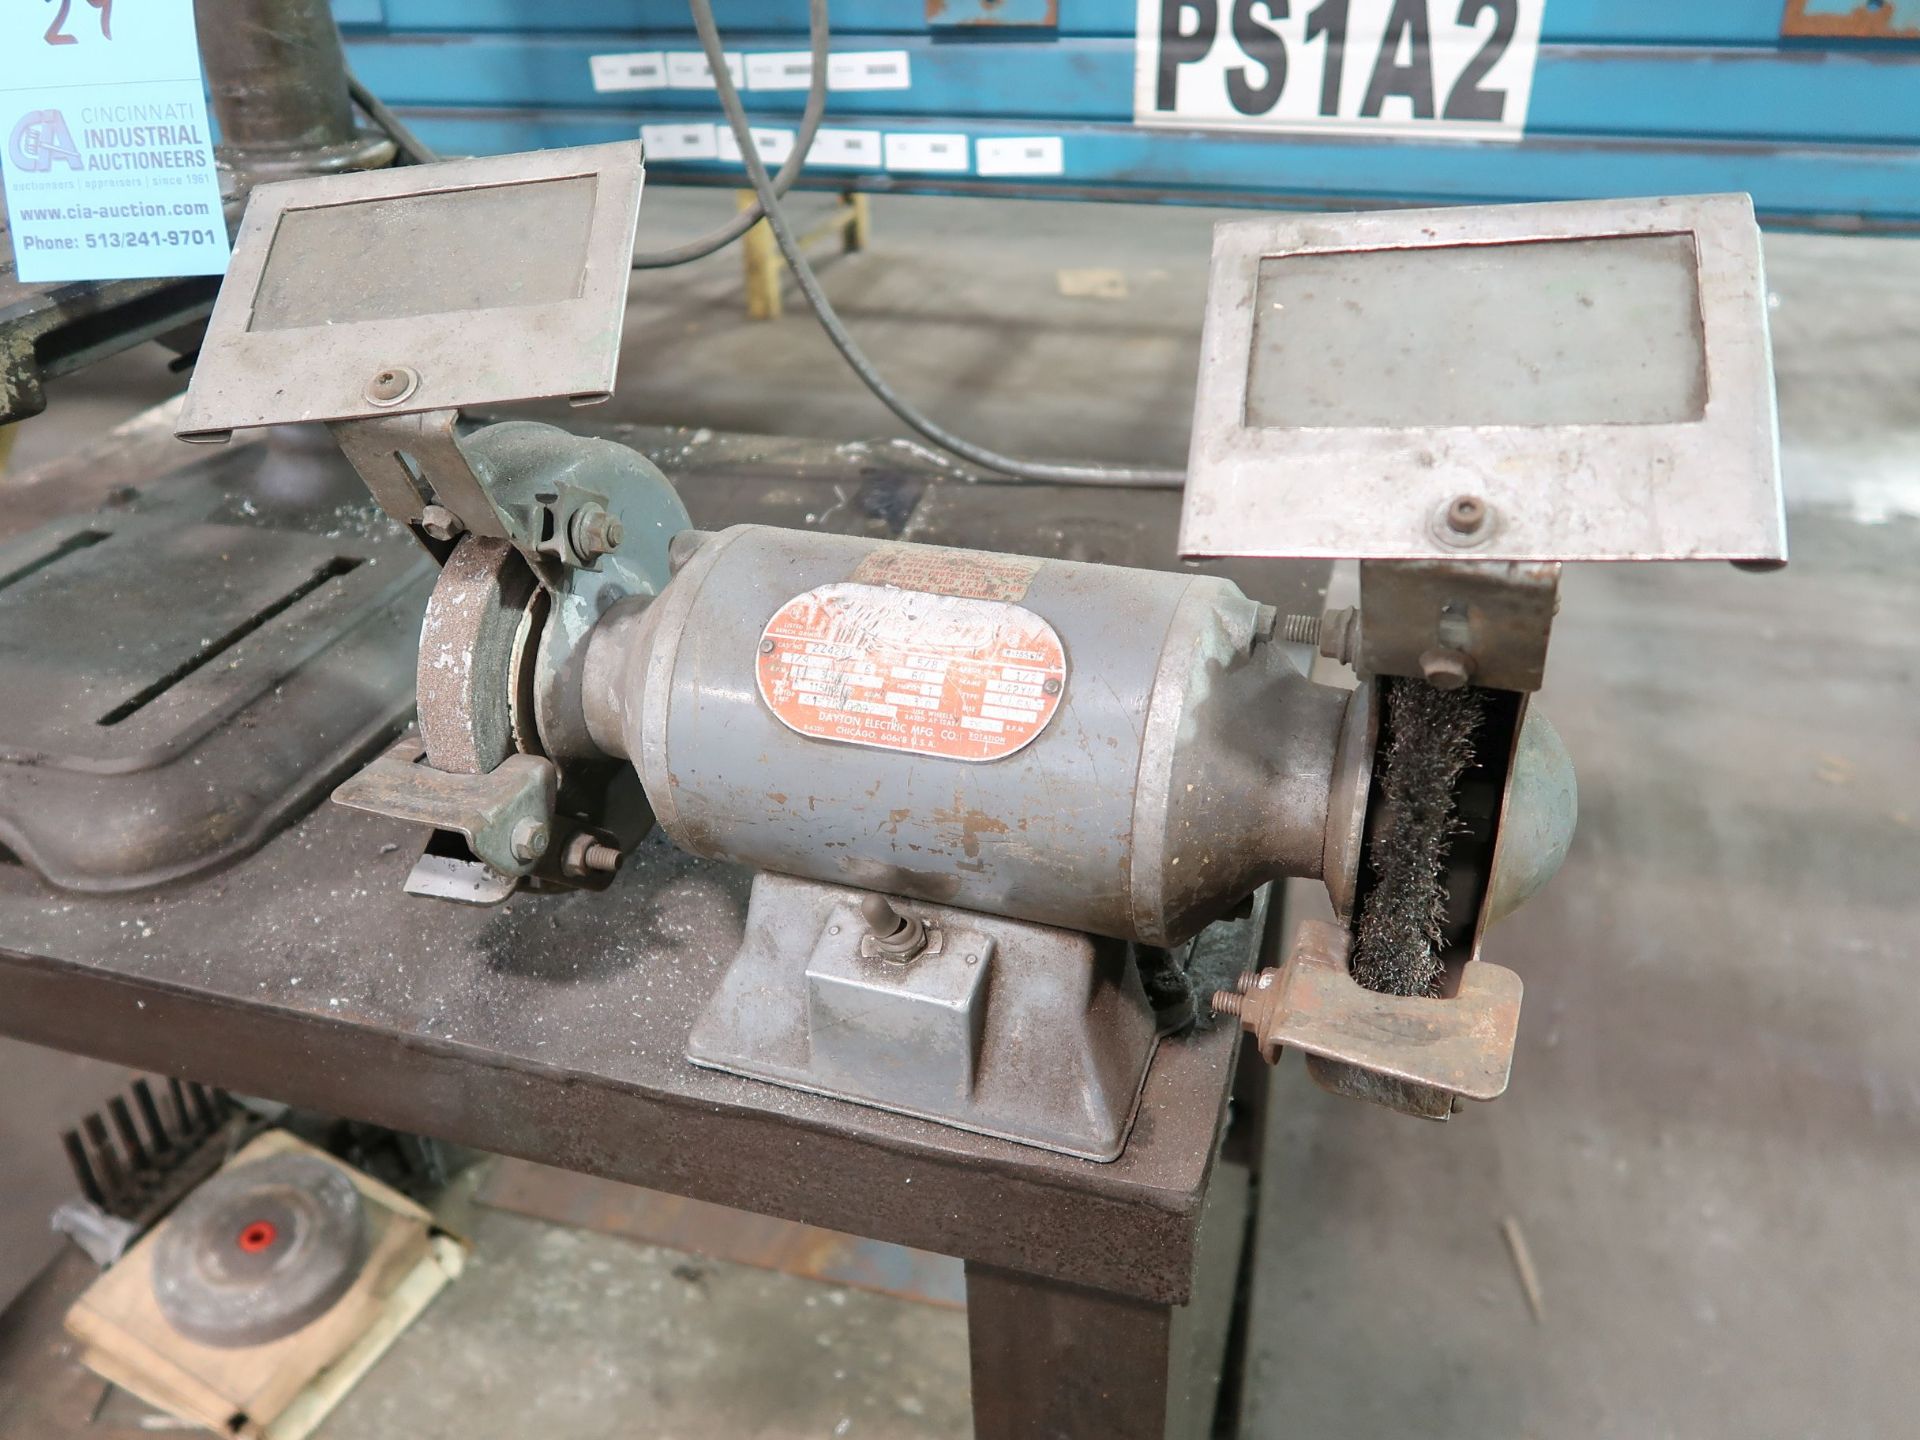 (LOT) 14" DELTA BENCH DRILL, 6" DE GRINDER AND 24" X 36" HEAVY DUTY STEEL BENCH - Image 5 of 7